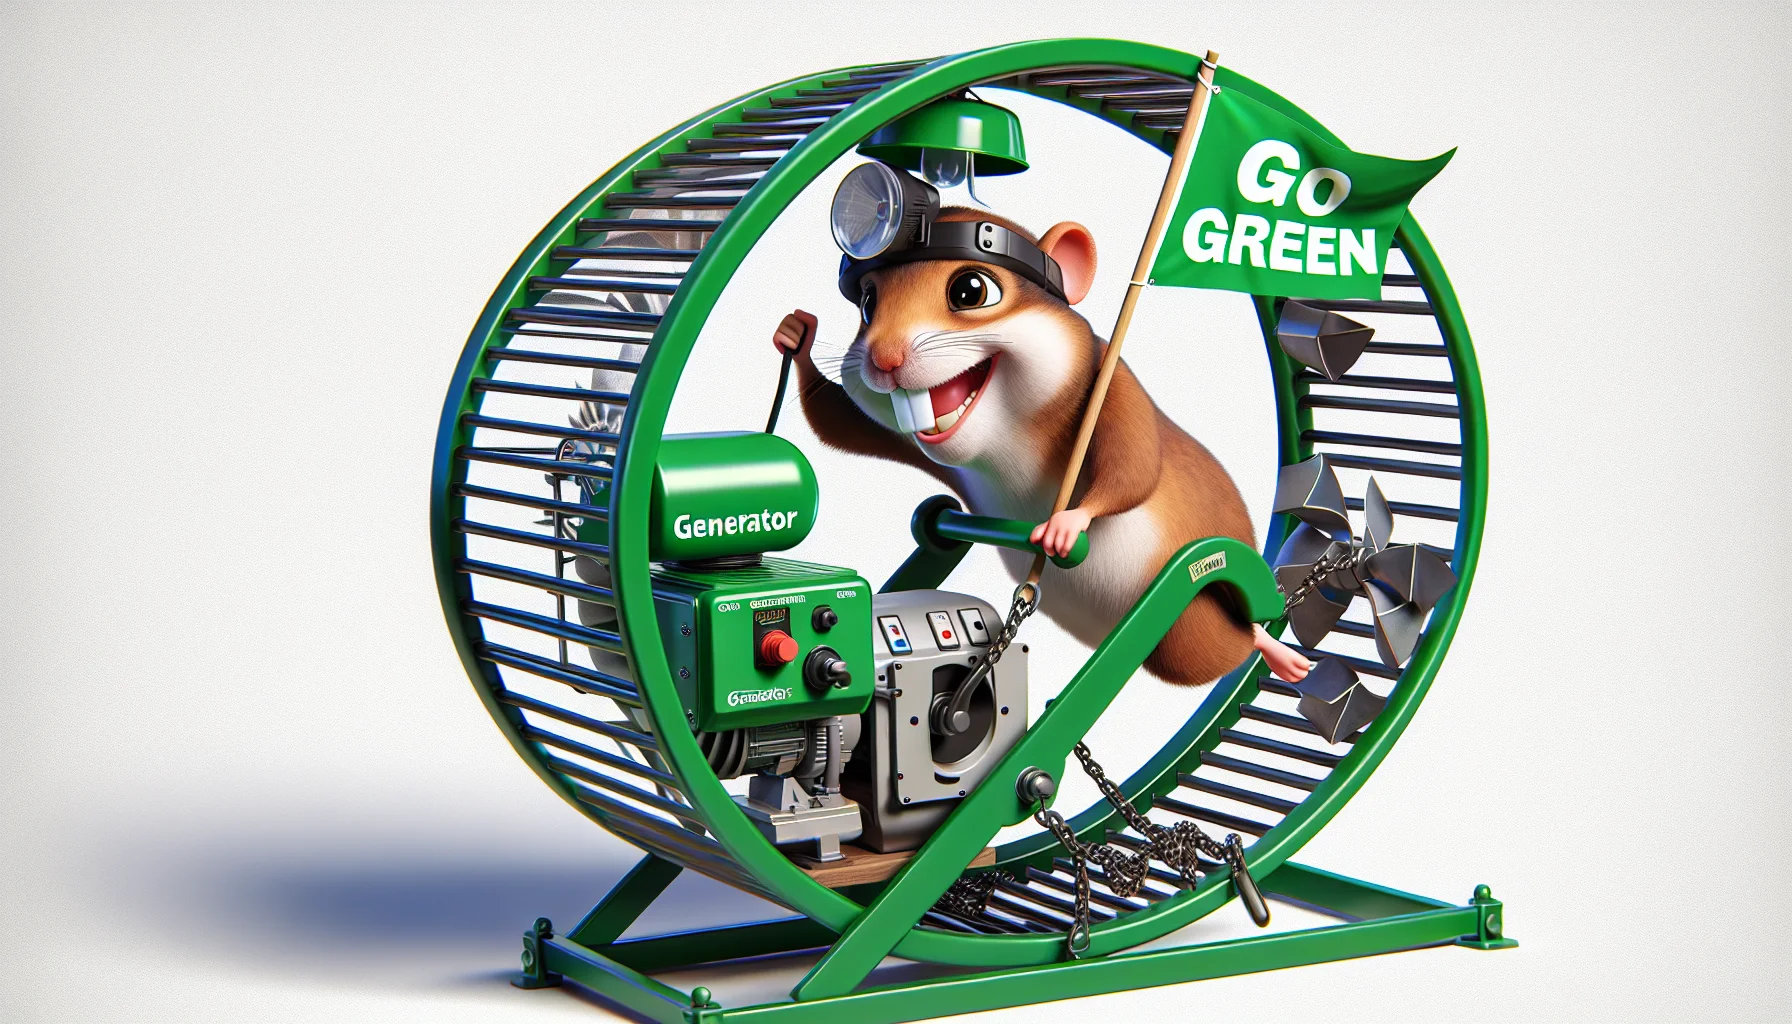 Create a humorous and enticing image in a realistic style displaying a Predator Generators Filter. Imagine this whimsical scene where the generator is placed in an exaggeratedly large hamster wheel. A cartoonish, anthropomorphic hamster is running in it, wearing a safety helmet and holding a flag with the word 'Go Green' on it. This suggests the idea that the hamster is powering the generator, encouraging people to create their own electricity in fun, eco-friendly ways.